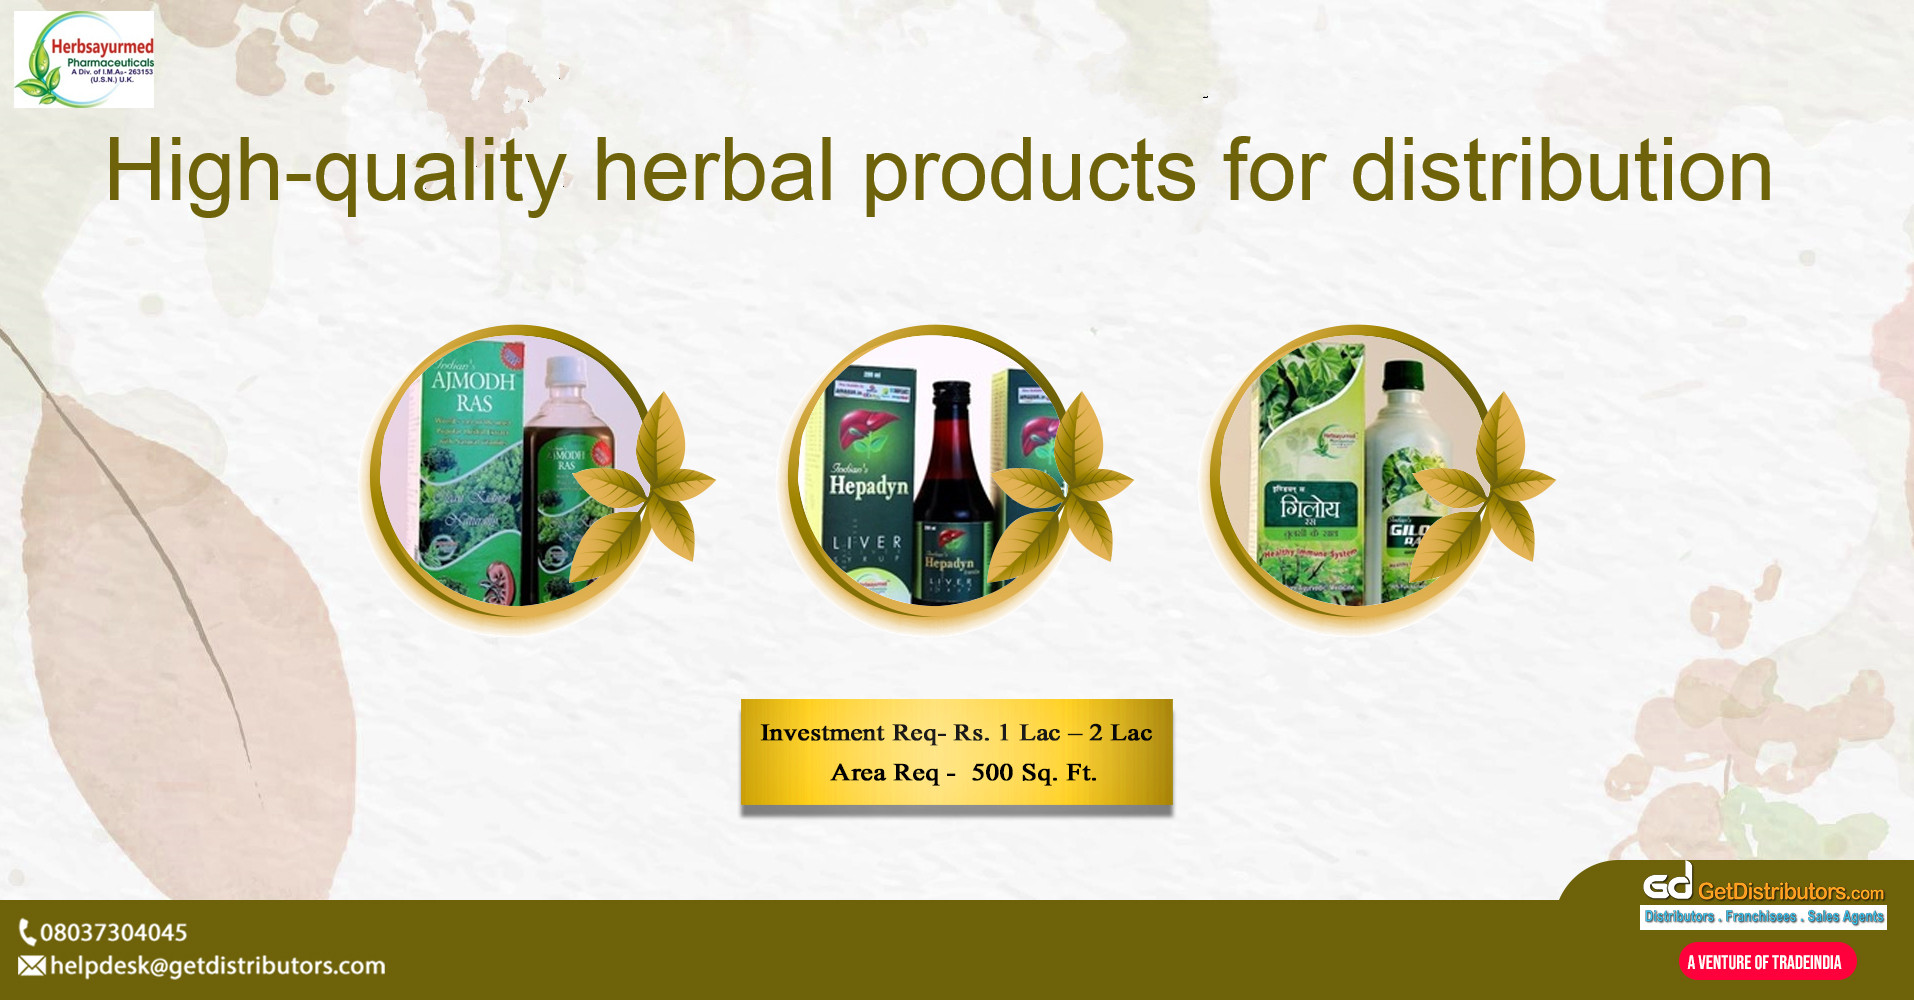 High-quality herbal products for distribution